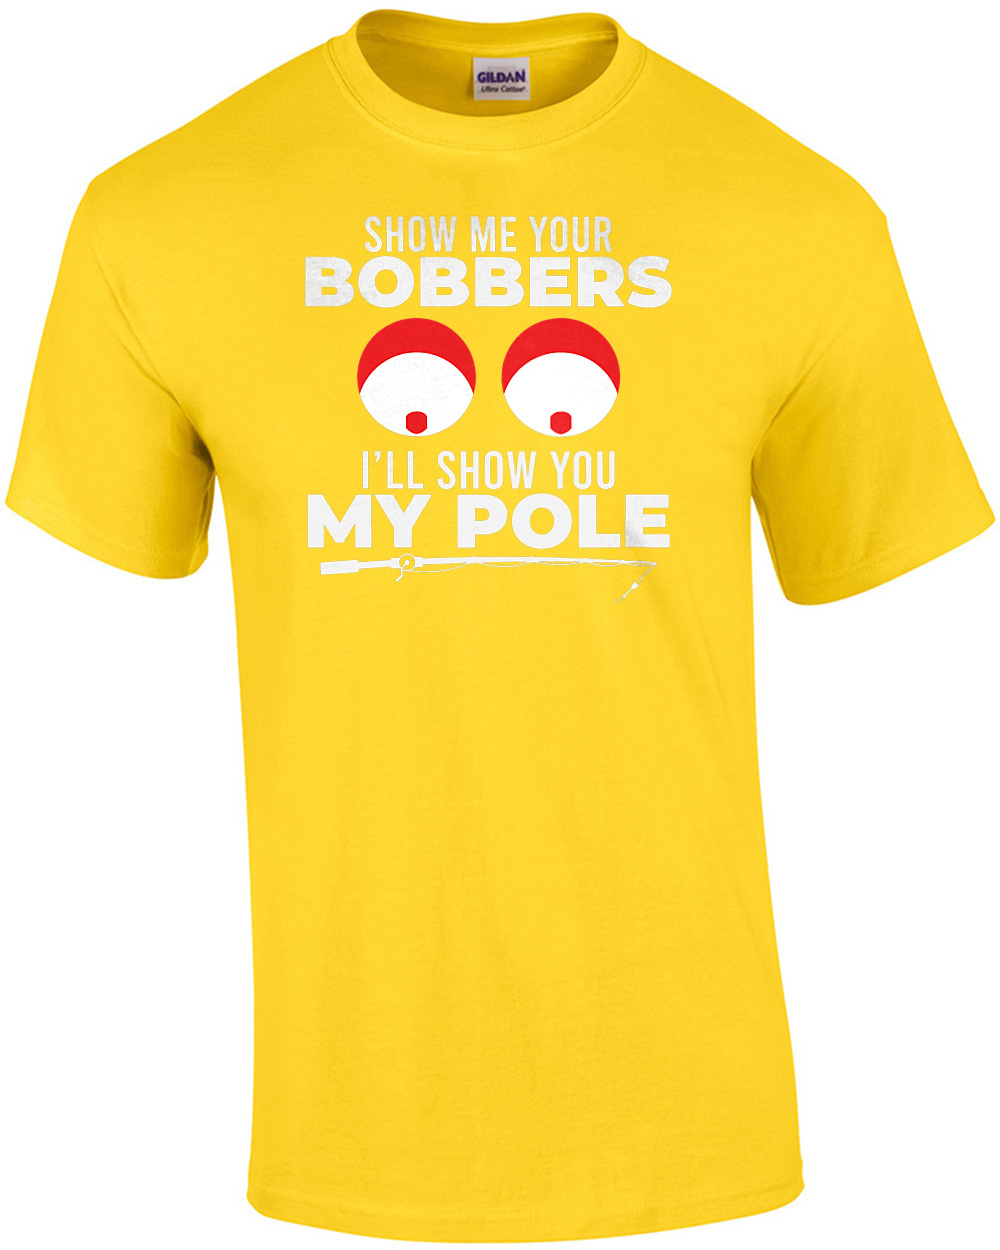  Show Me Your Bobbers T-Shirt : Clothing, Shoes & Jewelry